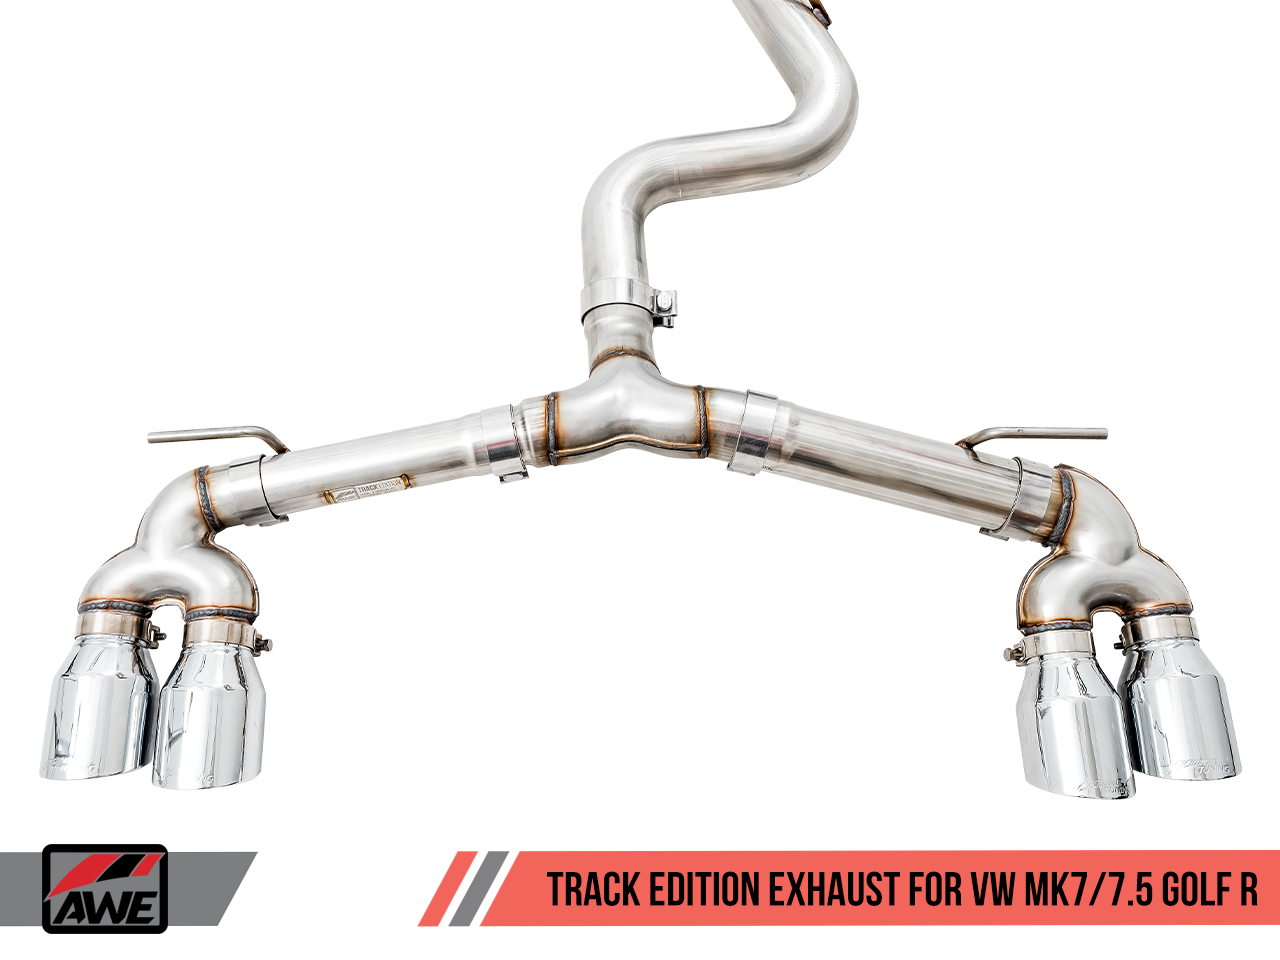 AWE Track Edition Catback Exhaust for MK7 Golf R